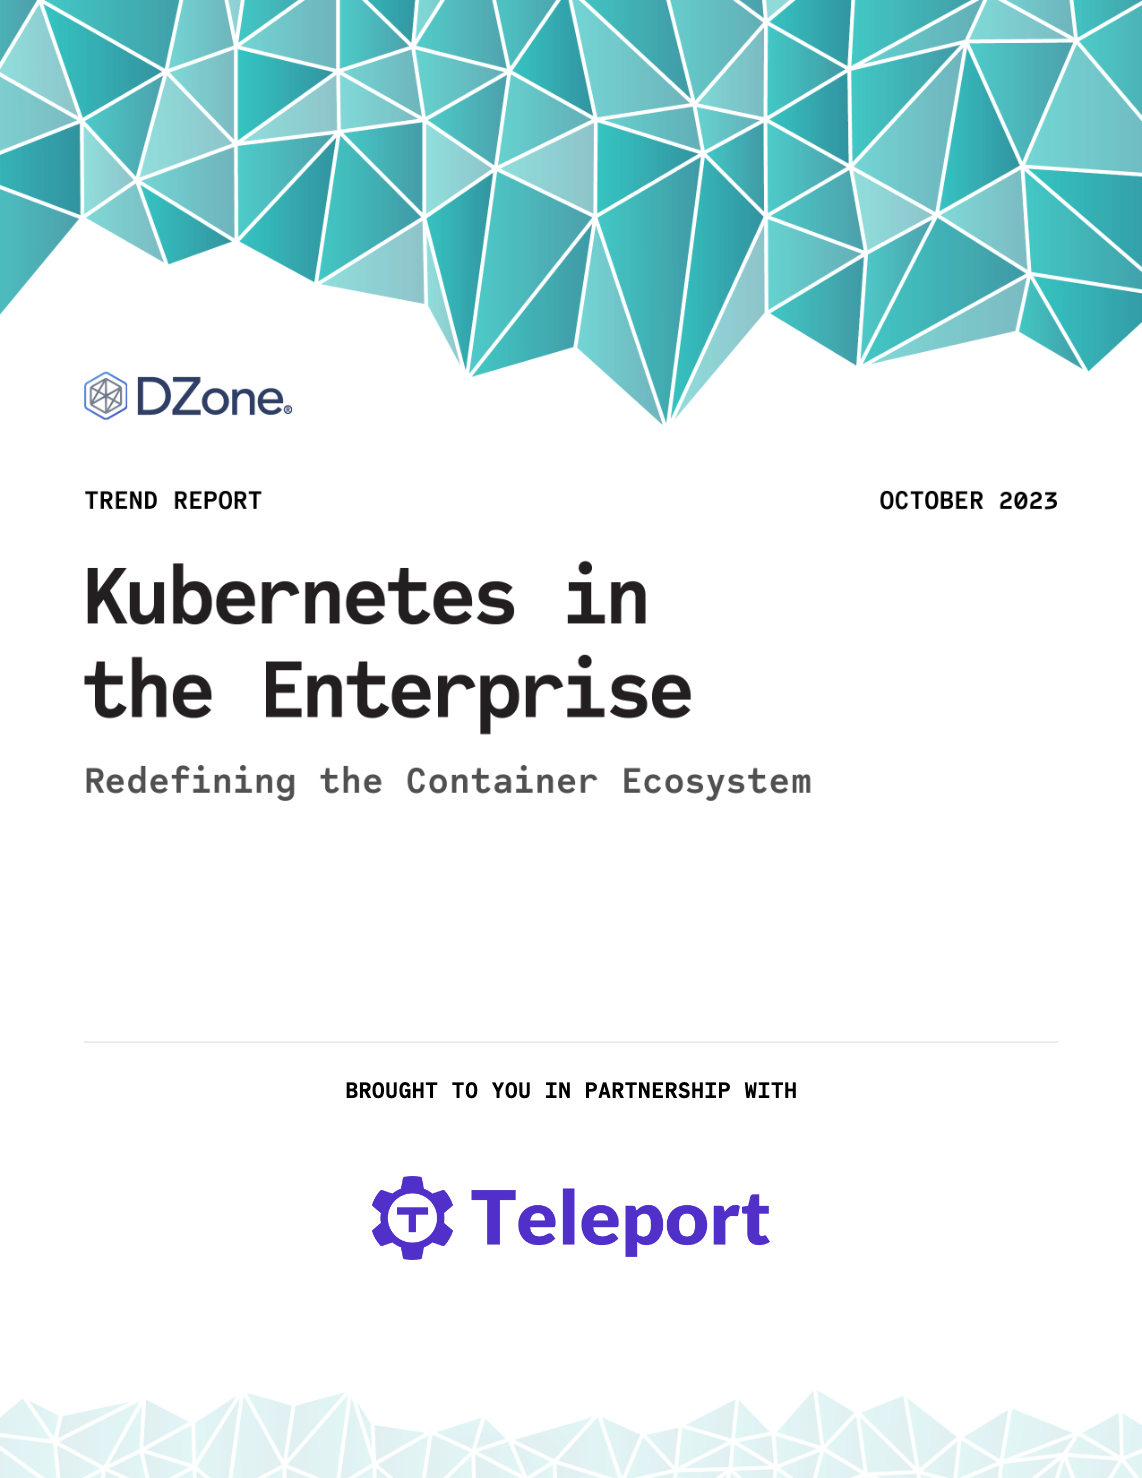 Book cover for "Kubernetes in the Enterprise"